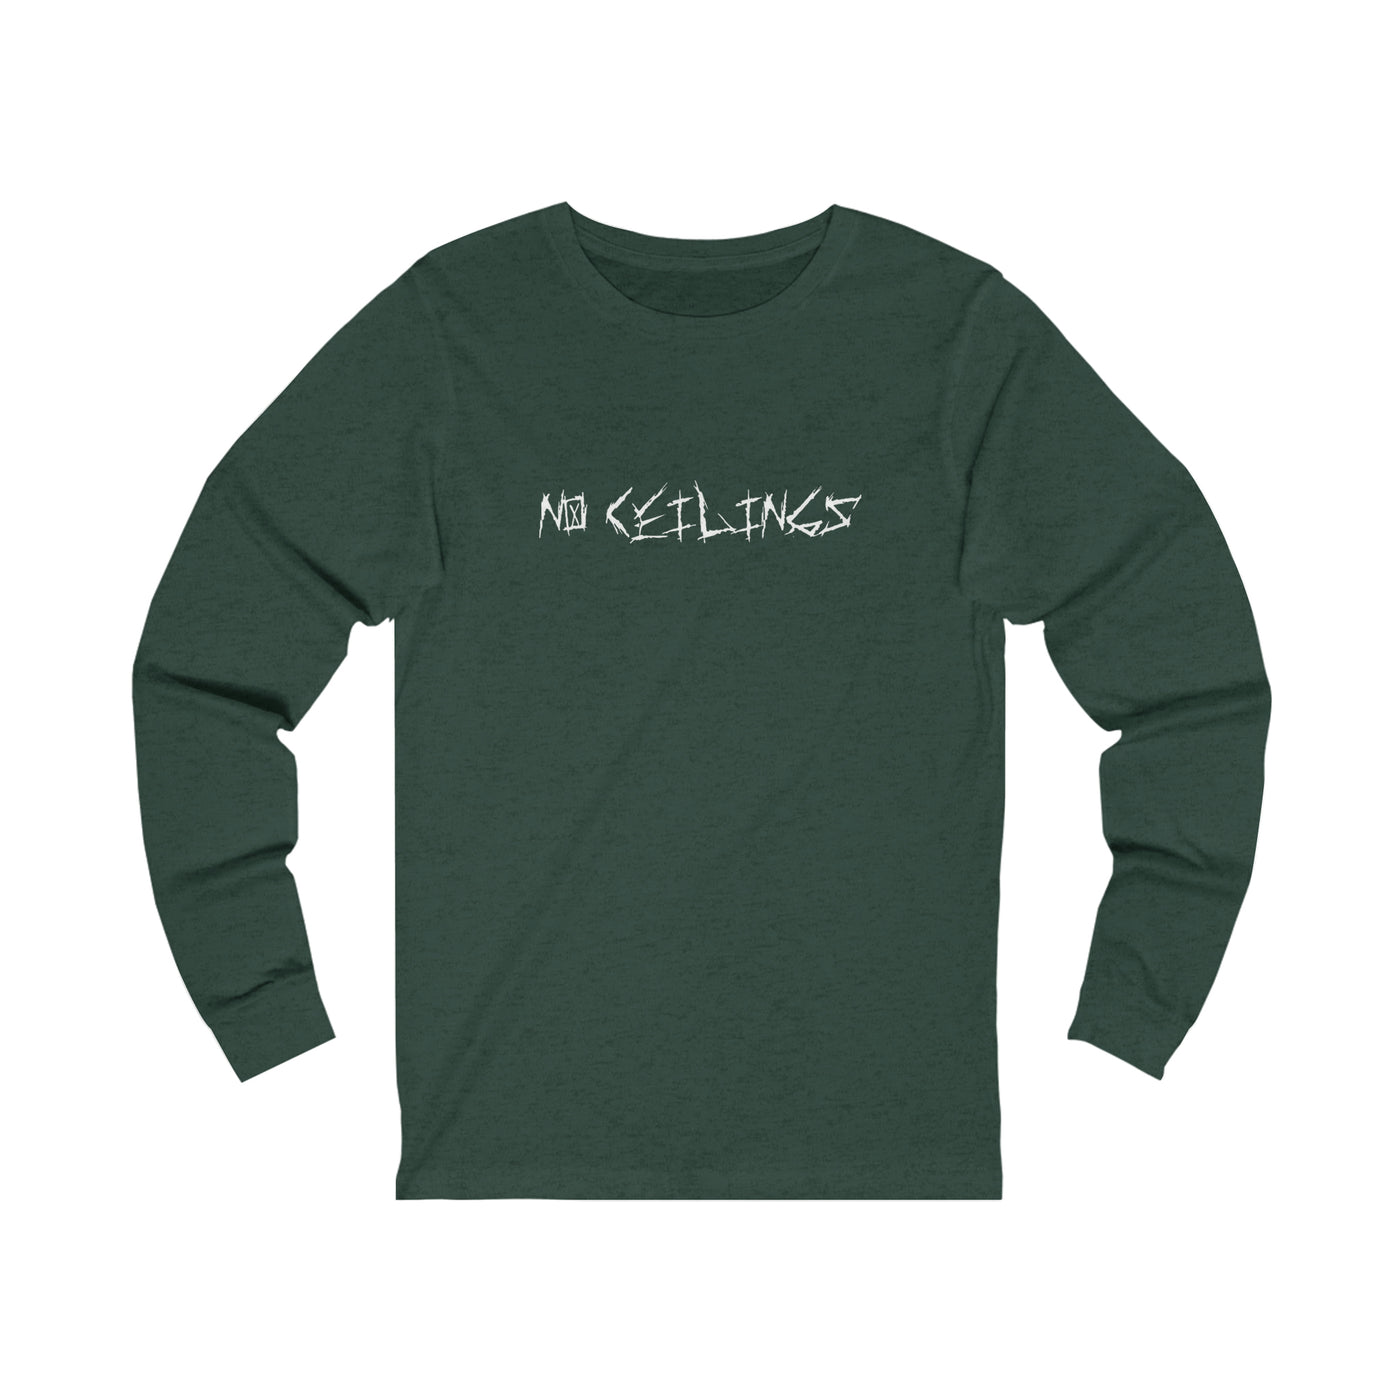 Army Green Jersey Long Sleeve Tee - NoCeilingsClothing